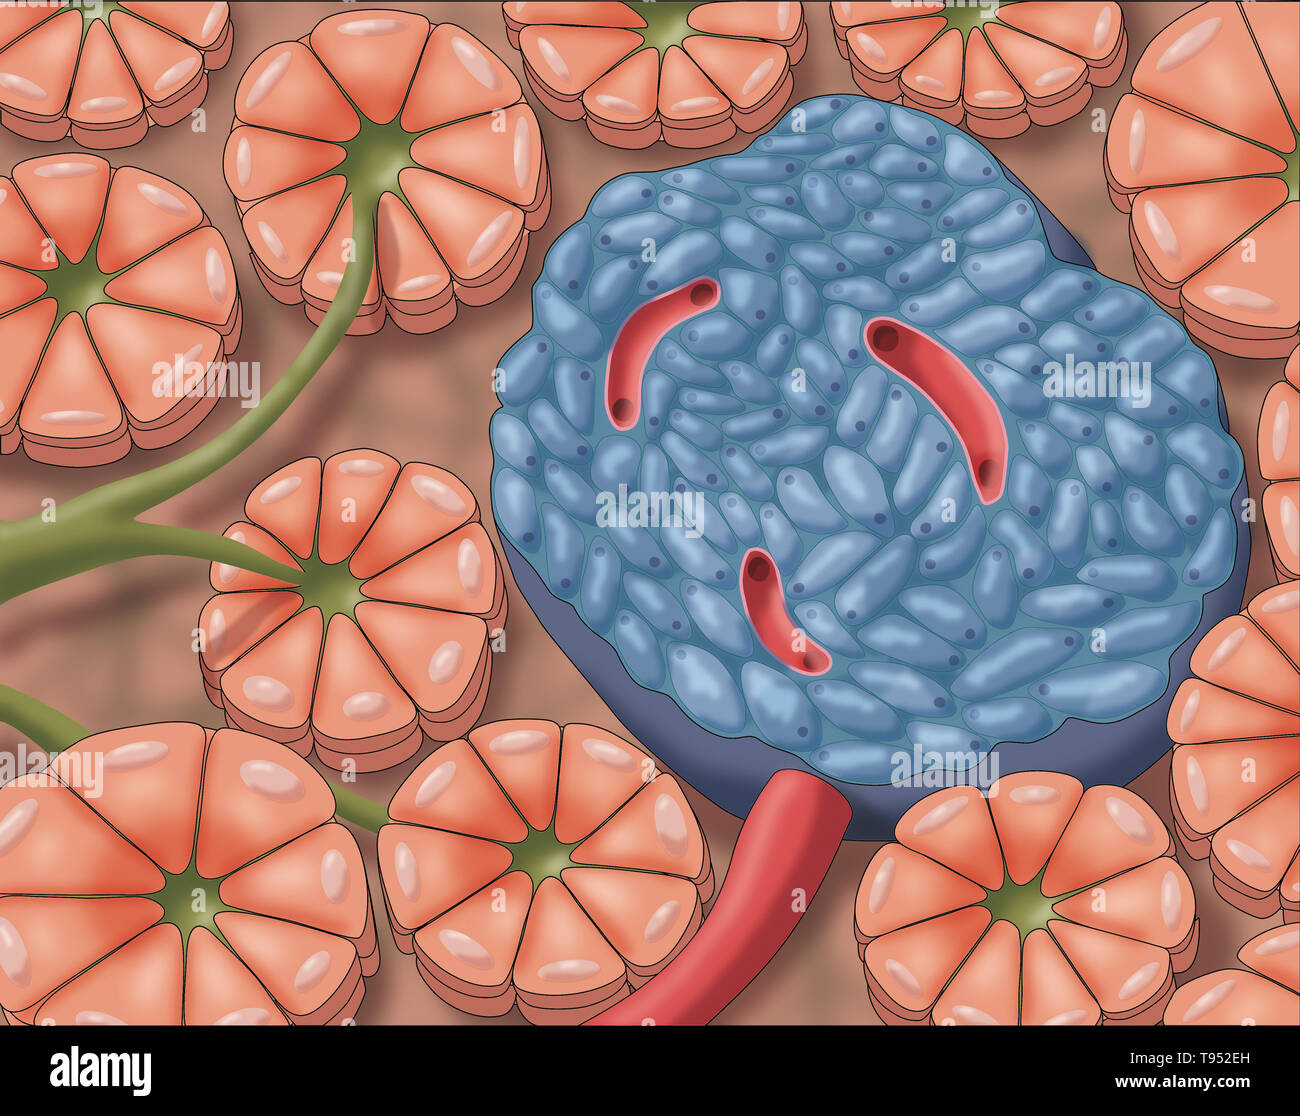 Illustration of pancreatic islets, also called islets of Langerhans, tiny clusters of cells scattered throughout the pancreas. Stock Photo